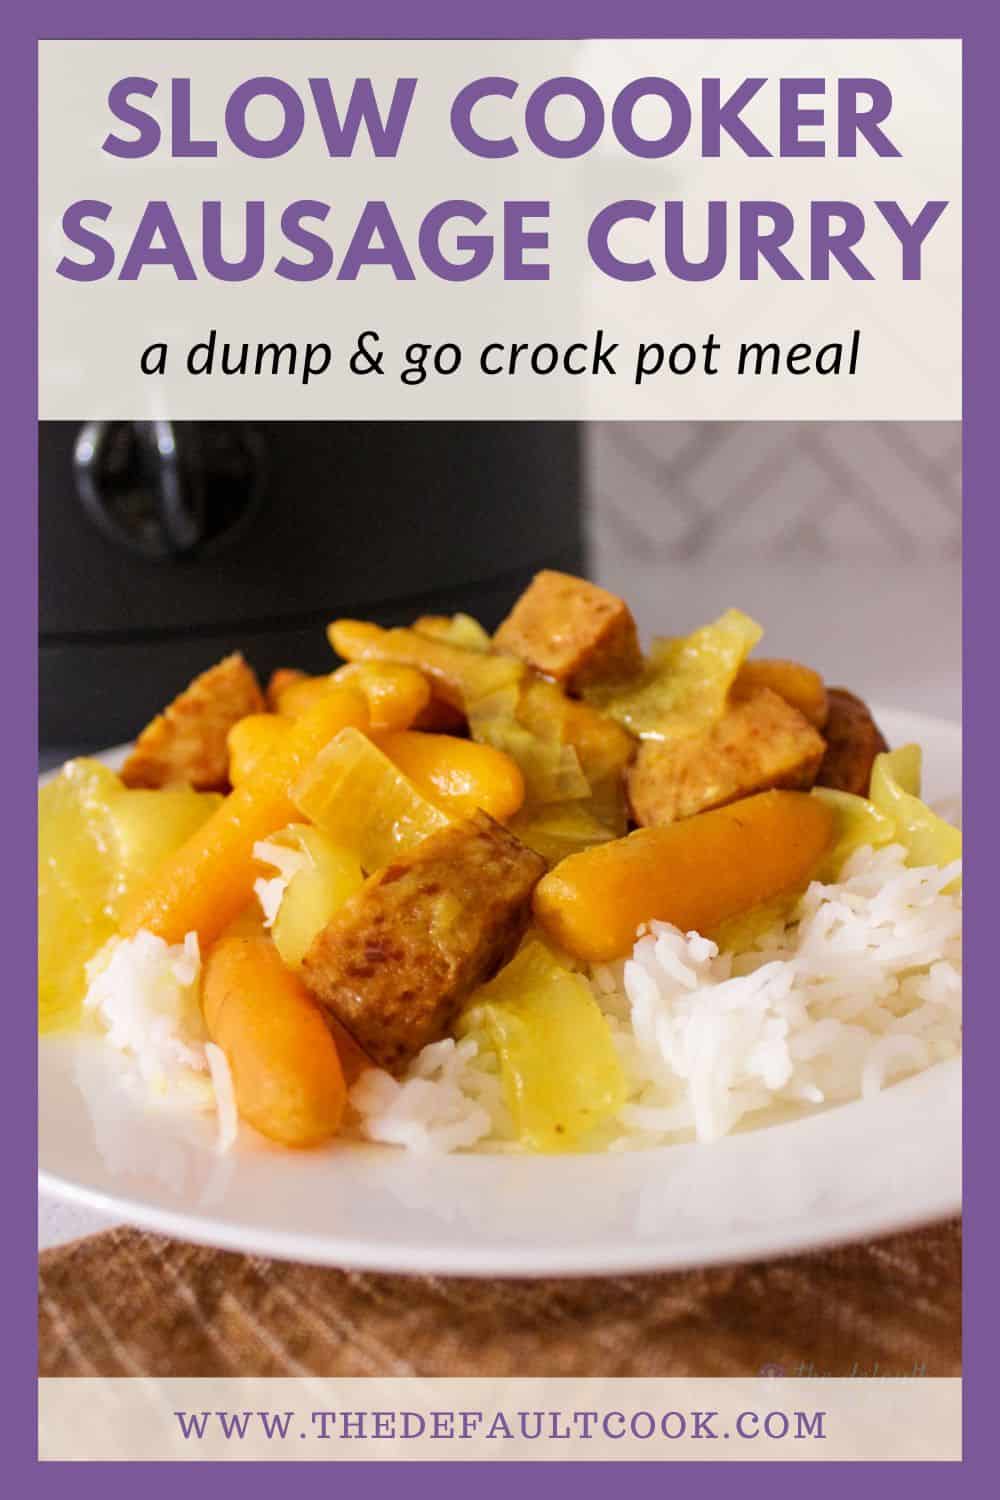 Slow cooker curry sausage on top of rice on a plate in front of slow cooker with title text above.